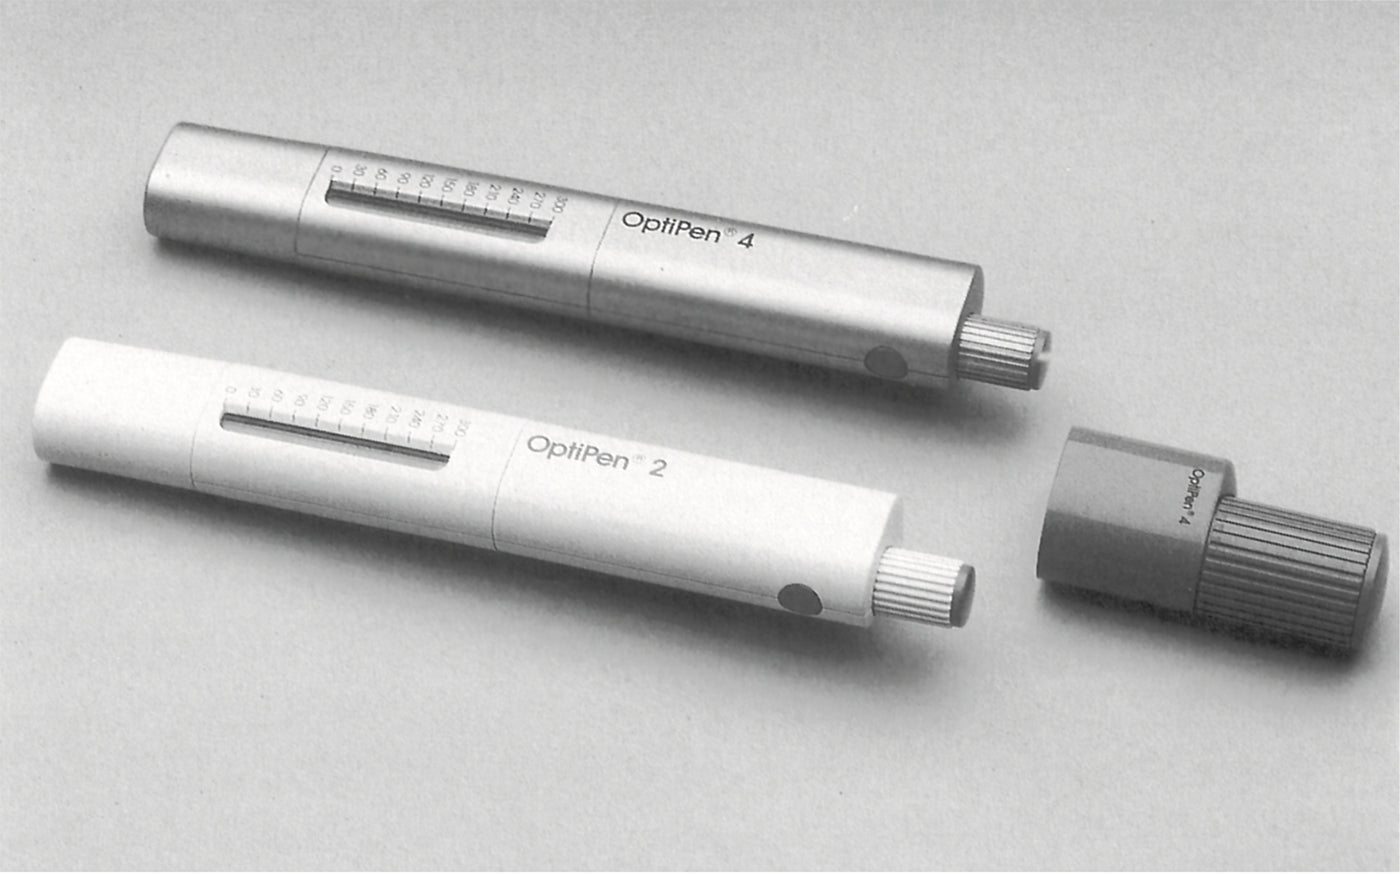 Injection pen for insulin designed by Braun for pharmaceutical company Hoechst AG. (Design by Peter Schneider, Jürgen Greubel, photography by Braun AG)